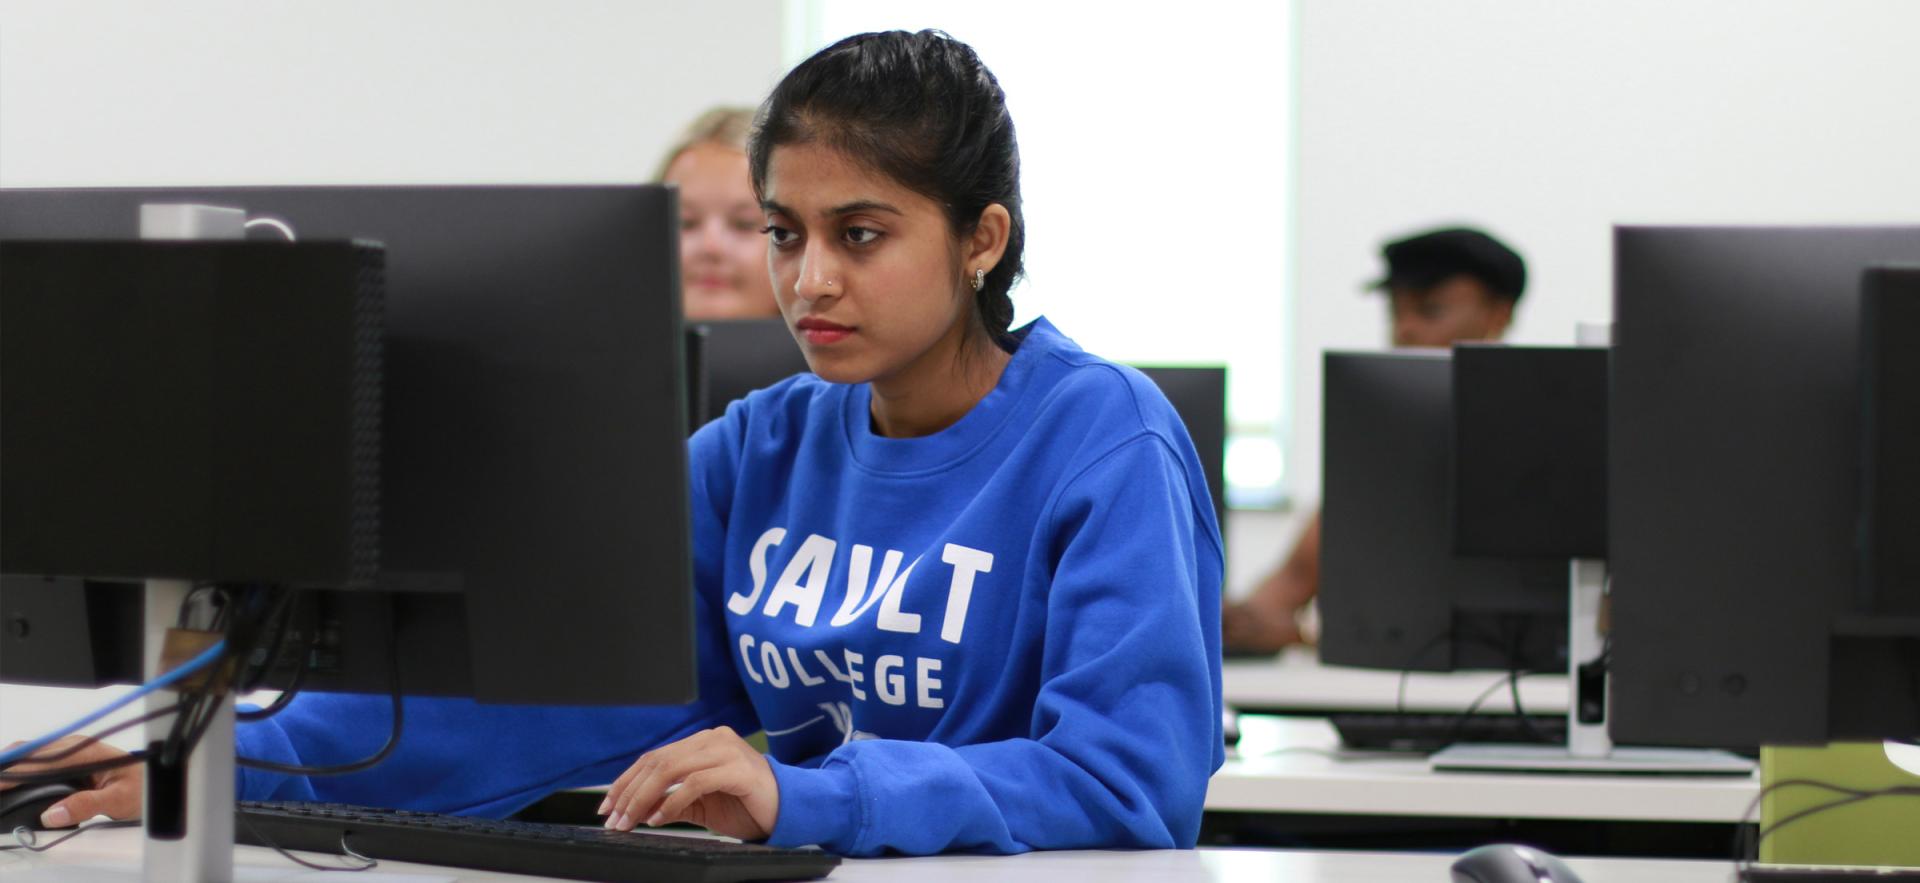 Student sitting at computer in class wearing blue ӣƵ sweater